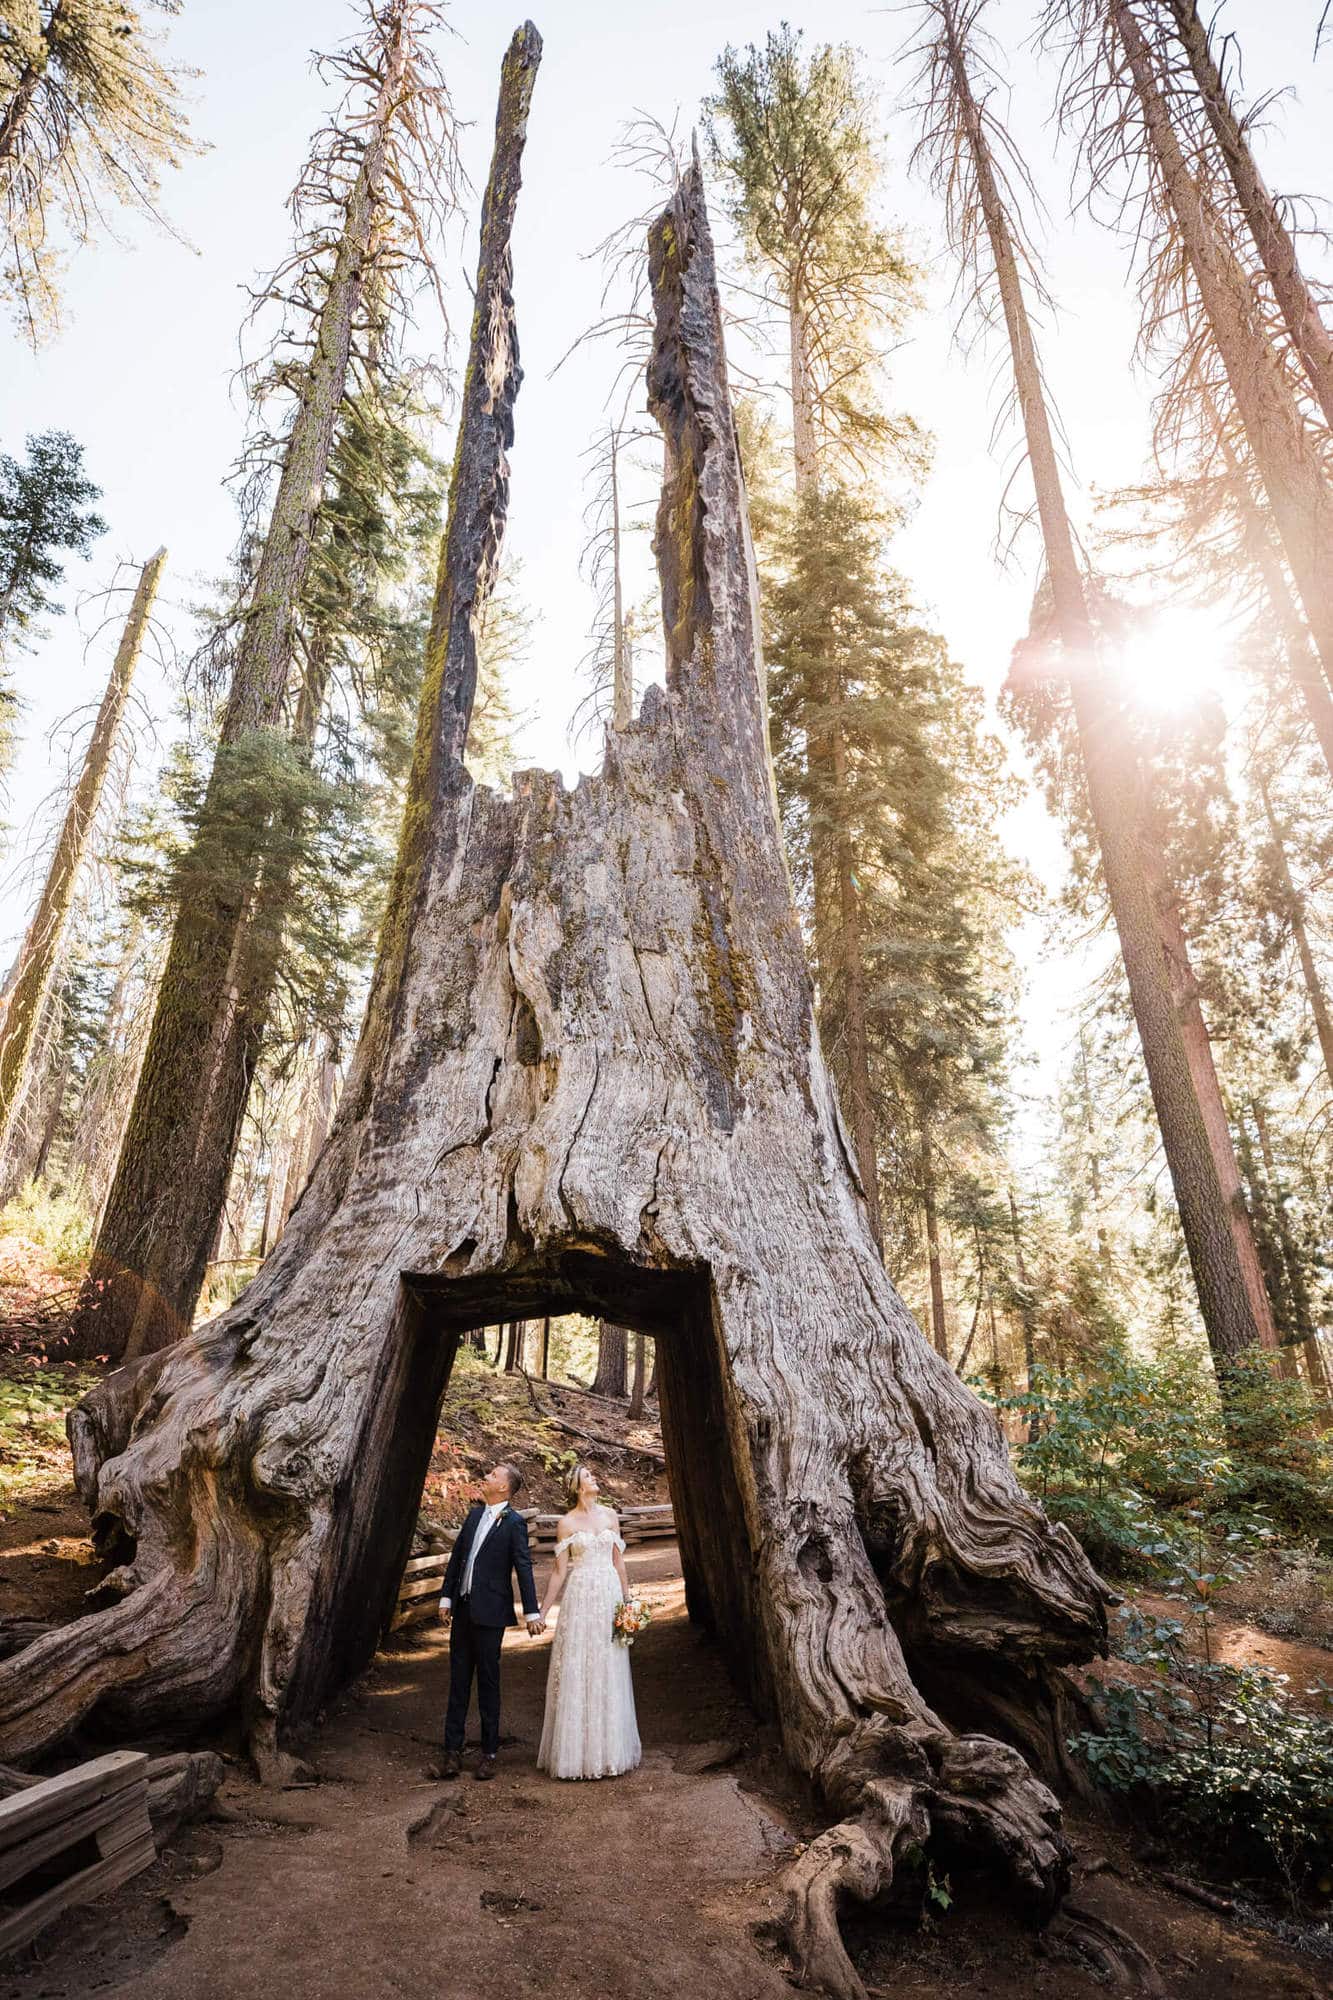 Having a Yosemite wedding is a total dream. This couple adventured around the park in epic fashion and is not to be missed.